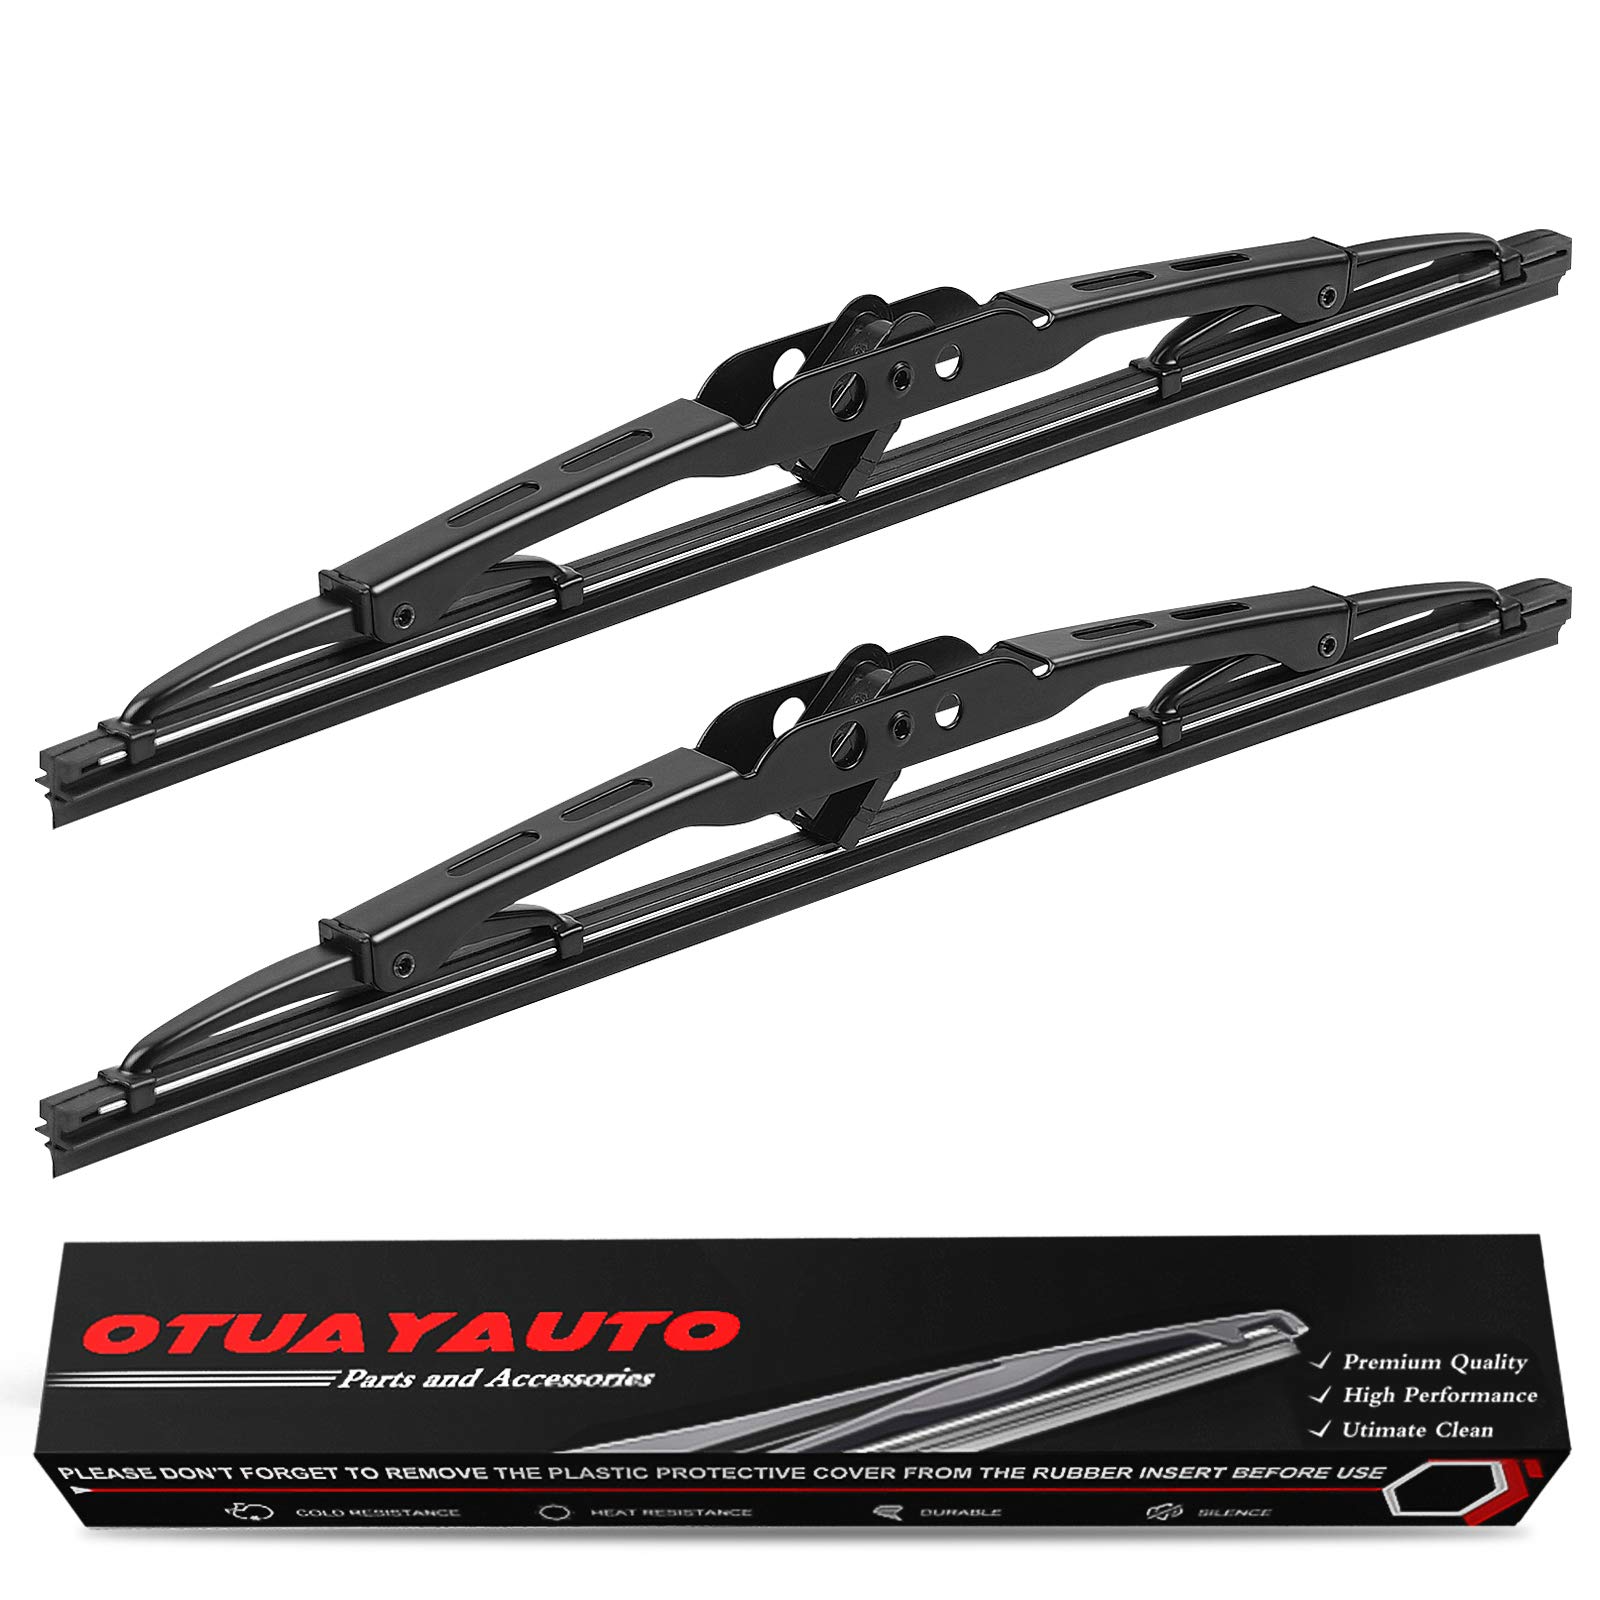 OTUAYAUTO 14" Rear Windshield Wiper Blade - Replacement for 2003-2010 Porsche Cayenne, 2008-2012 Jeep Liberty (Pack of 2)